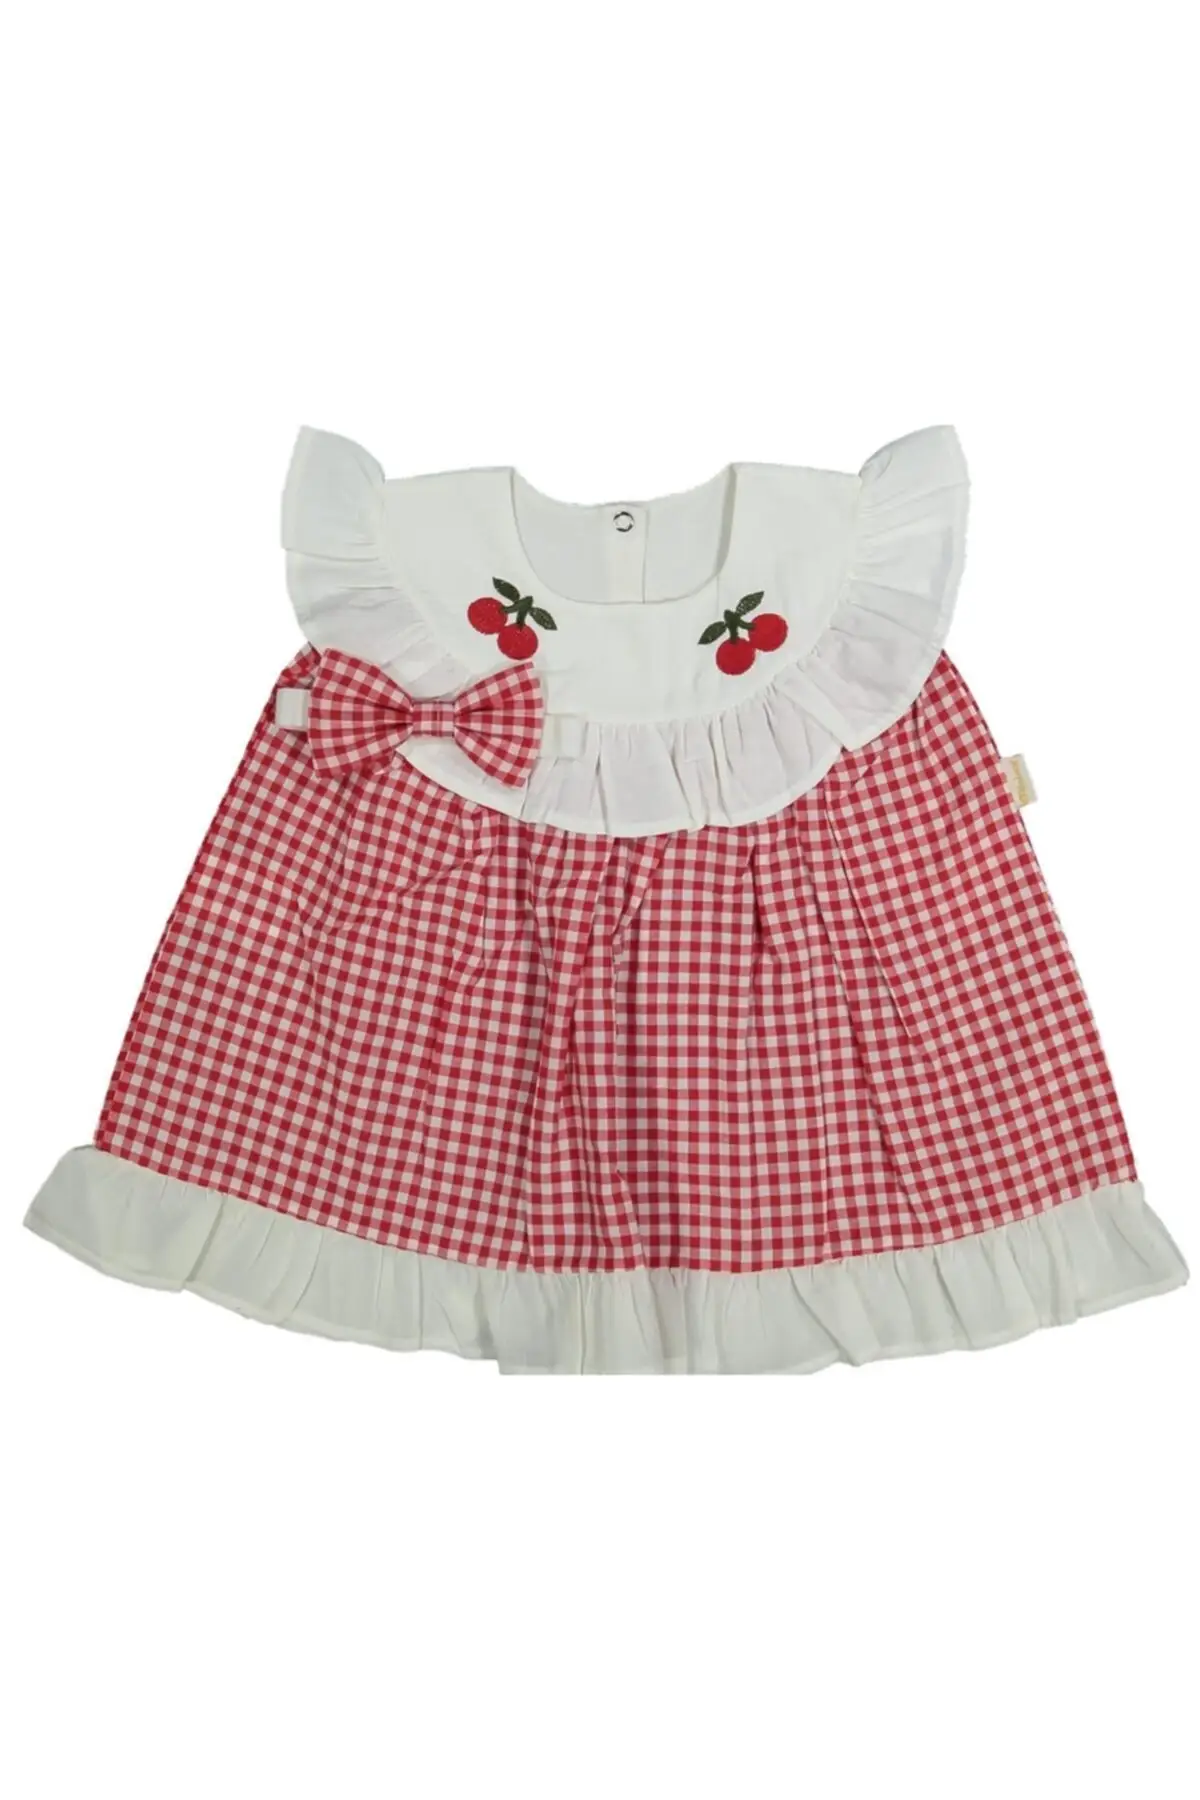 

Girl baby red pleated cherry detailed hair banded dress cotton sleeveless plaid/plaid ruffle double thin